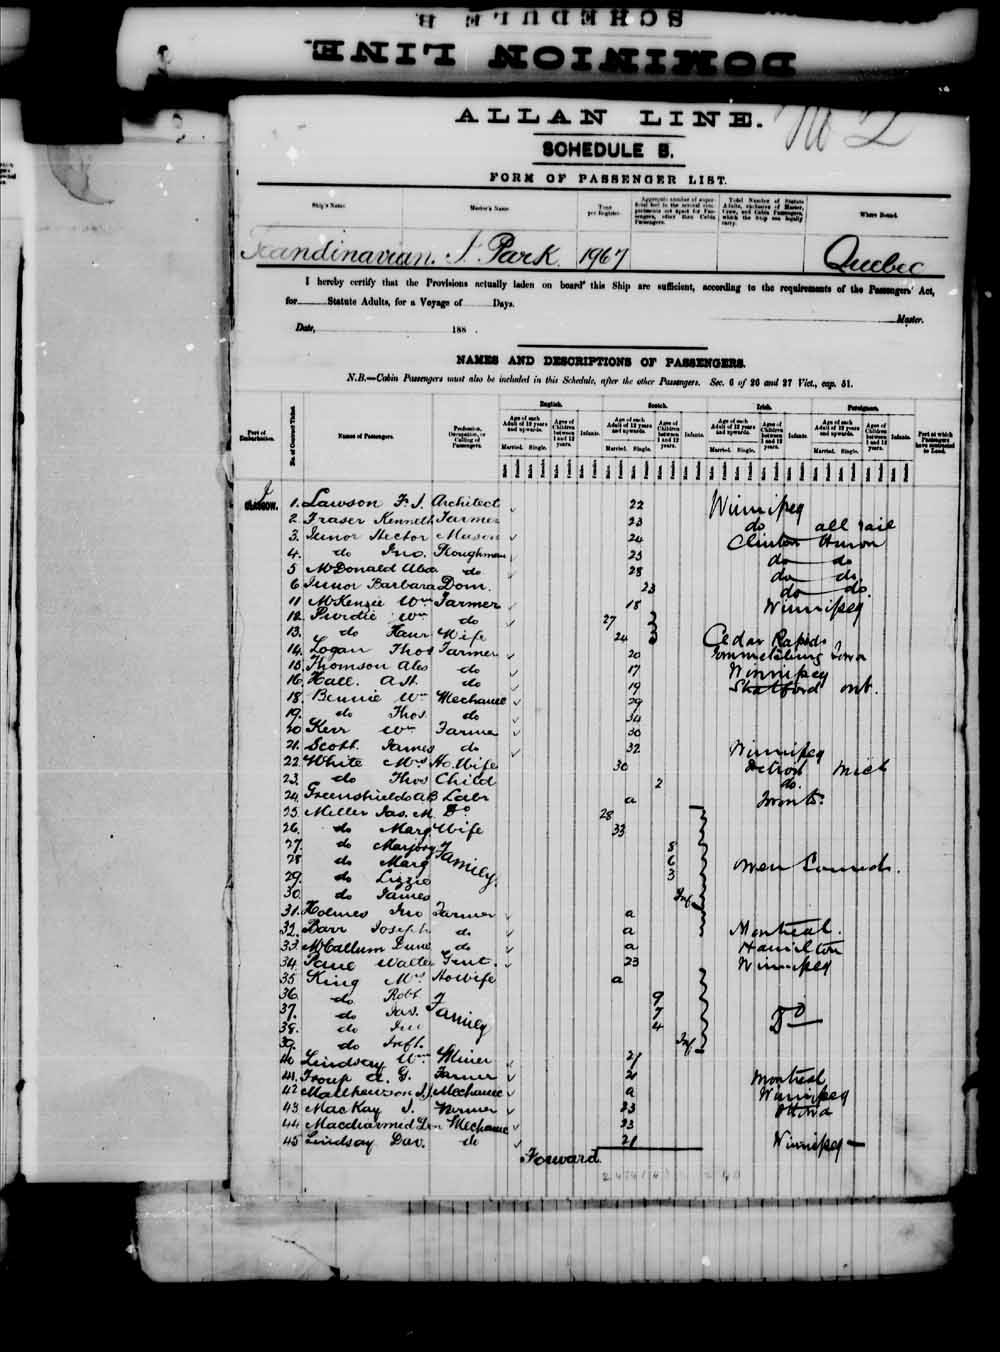 Digitized page of Passenger Lists for Image No.: e003542661